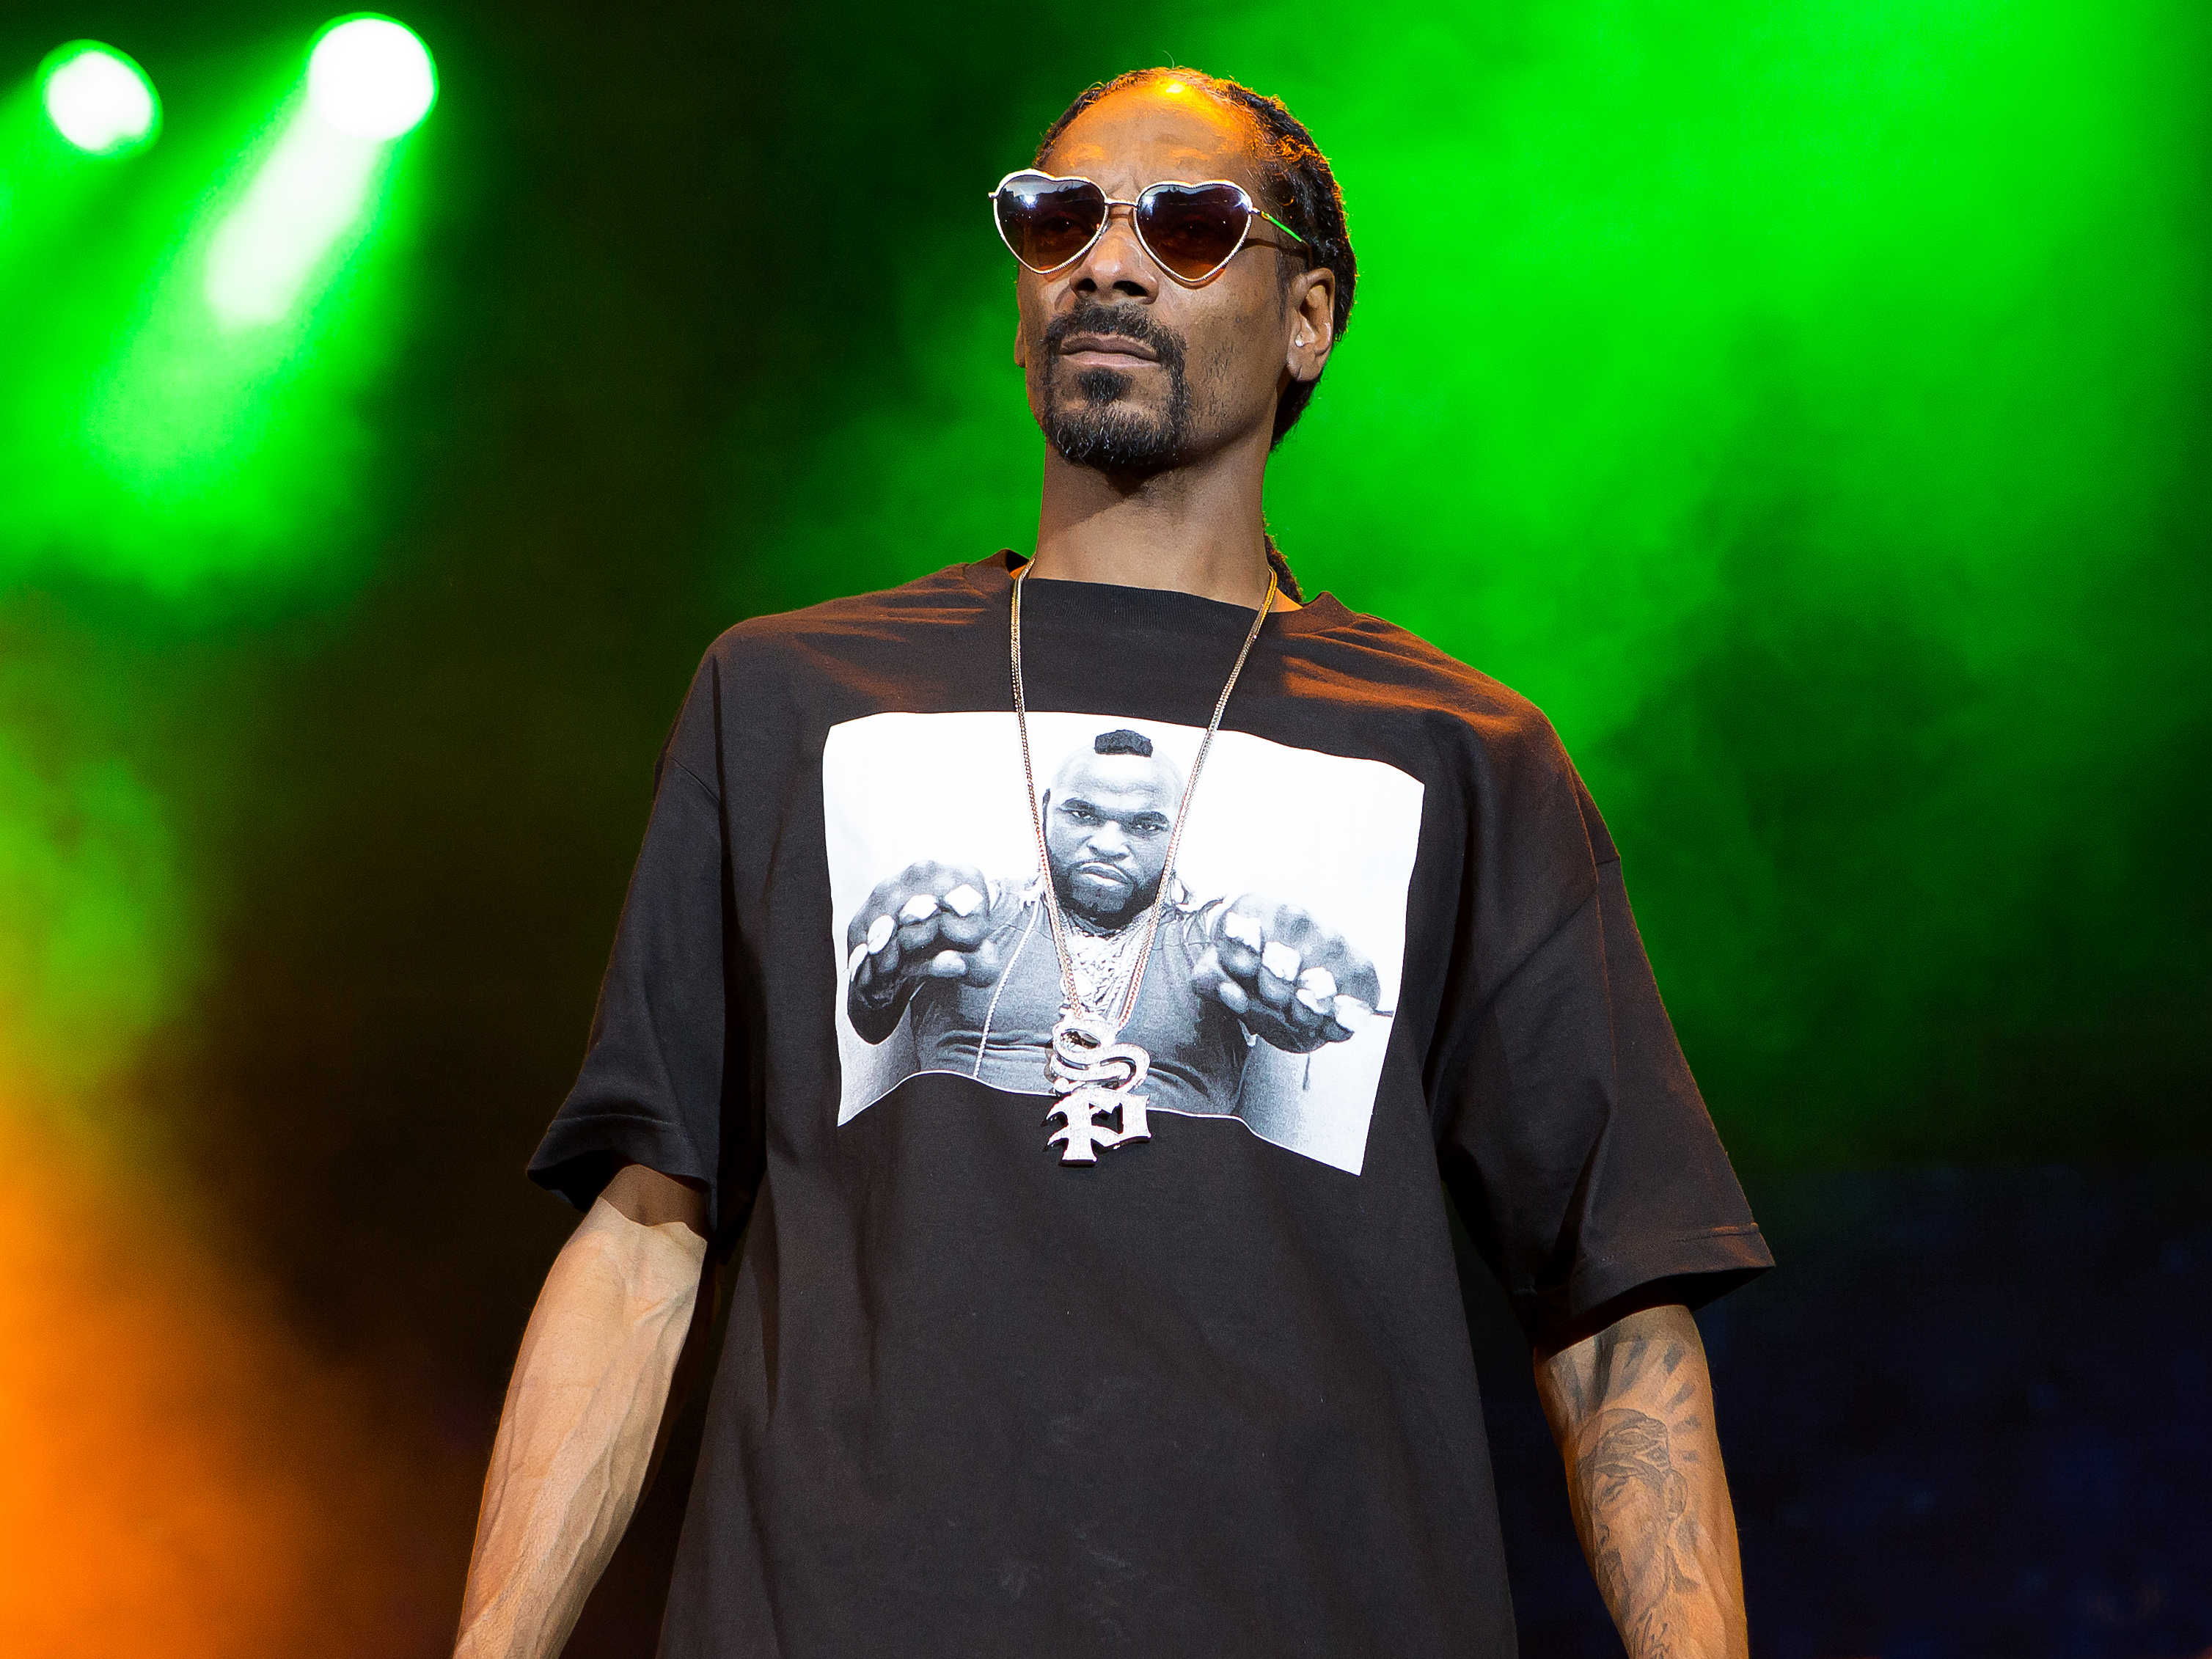 Snoop Dogg performs live